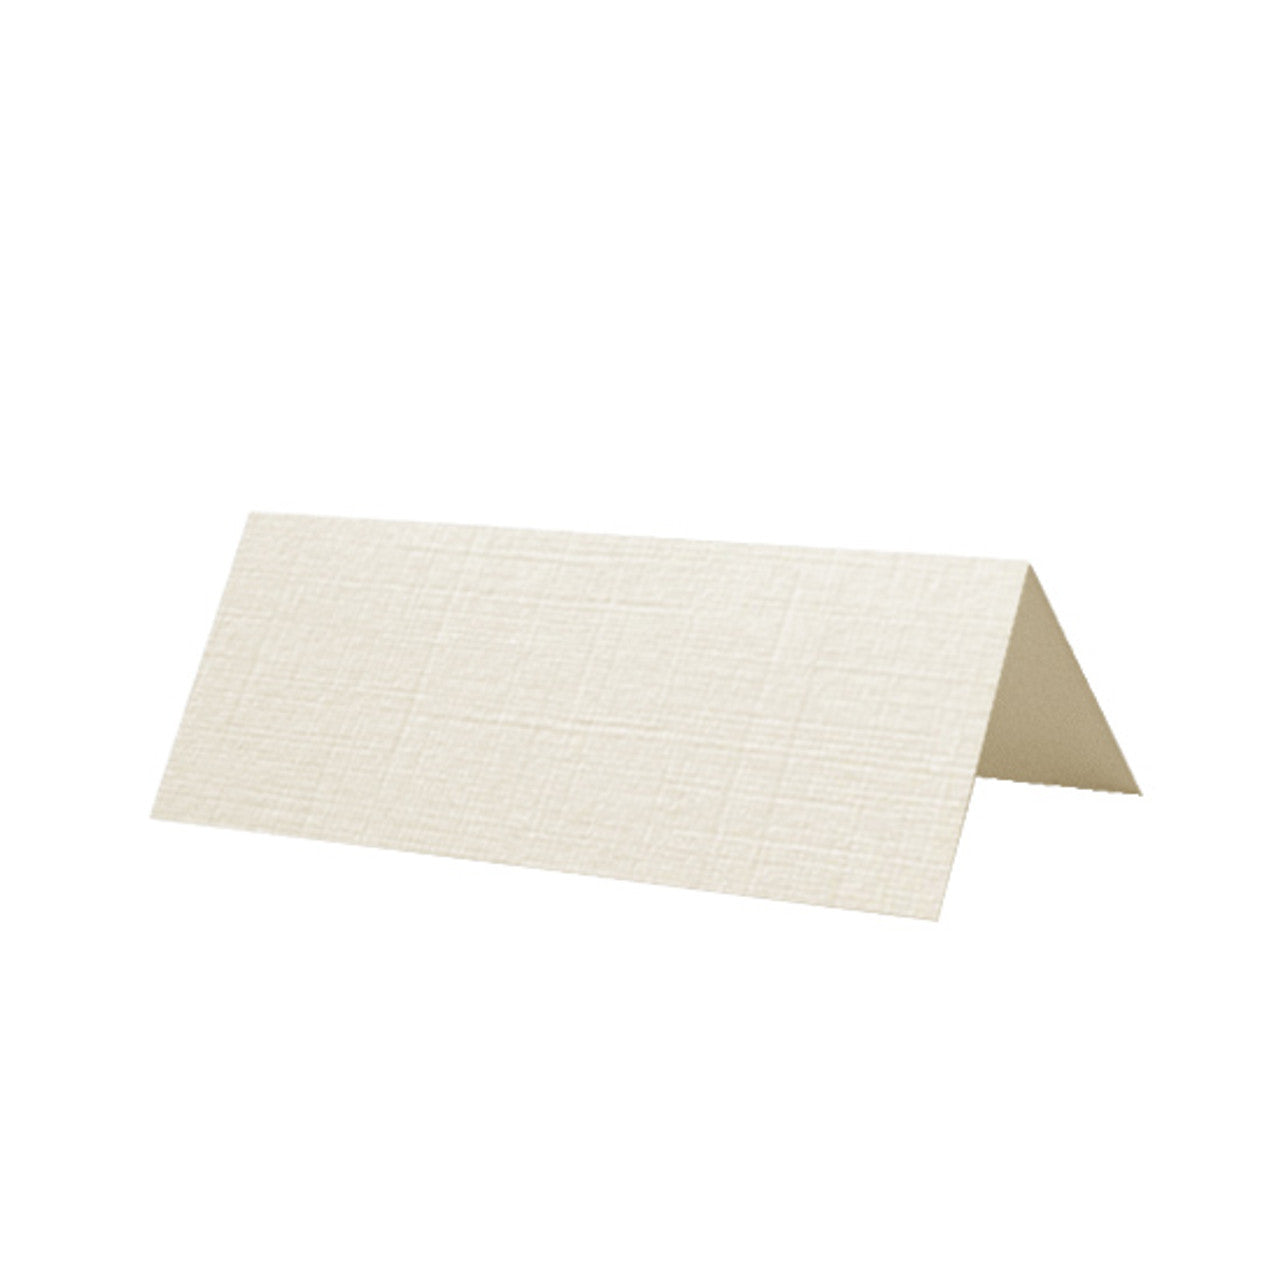 Ivory Place cards set of 10